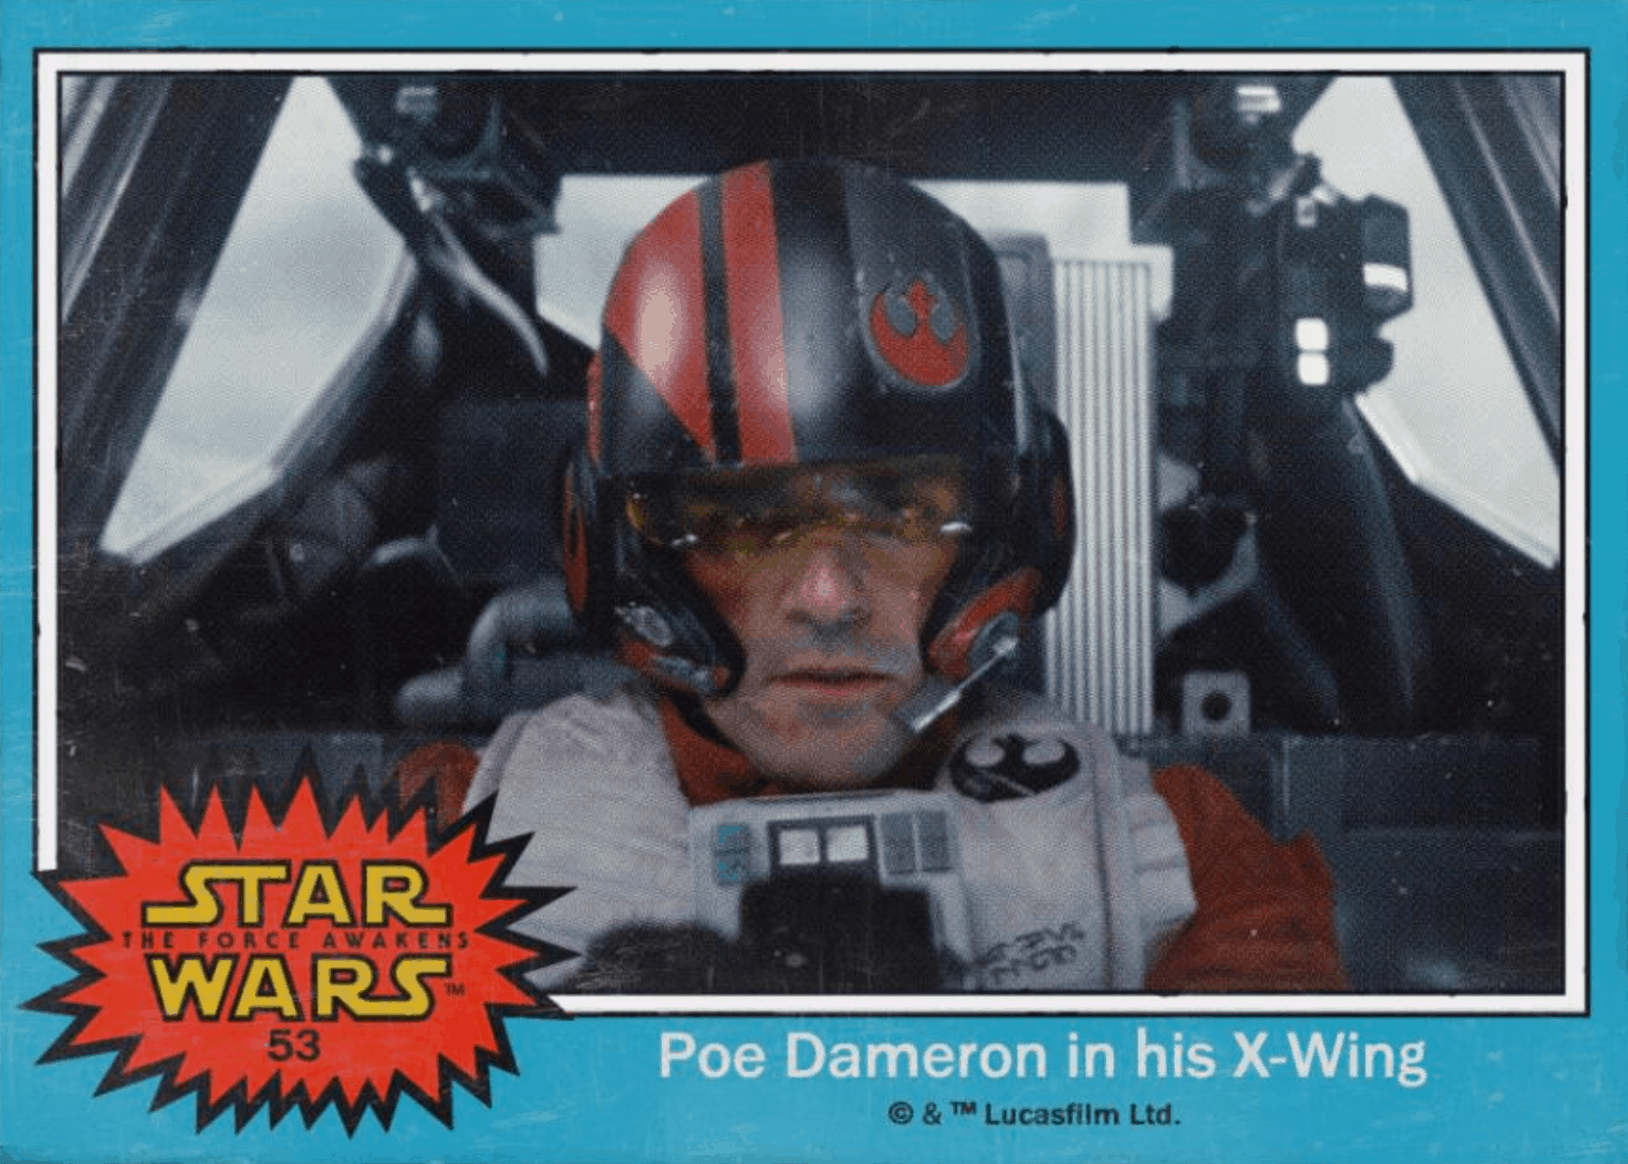 Poe Dameron Quotes from Star Wars: The Force Awakens